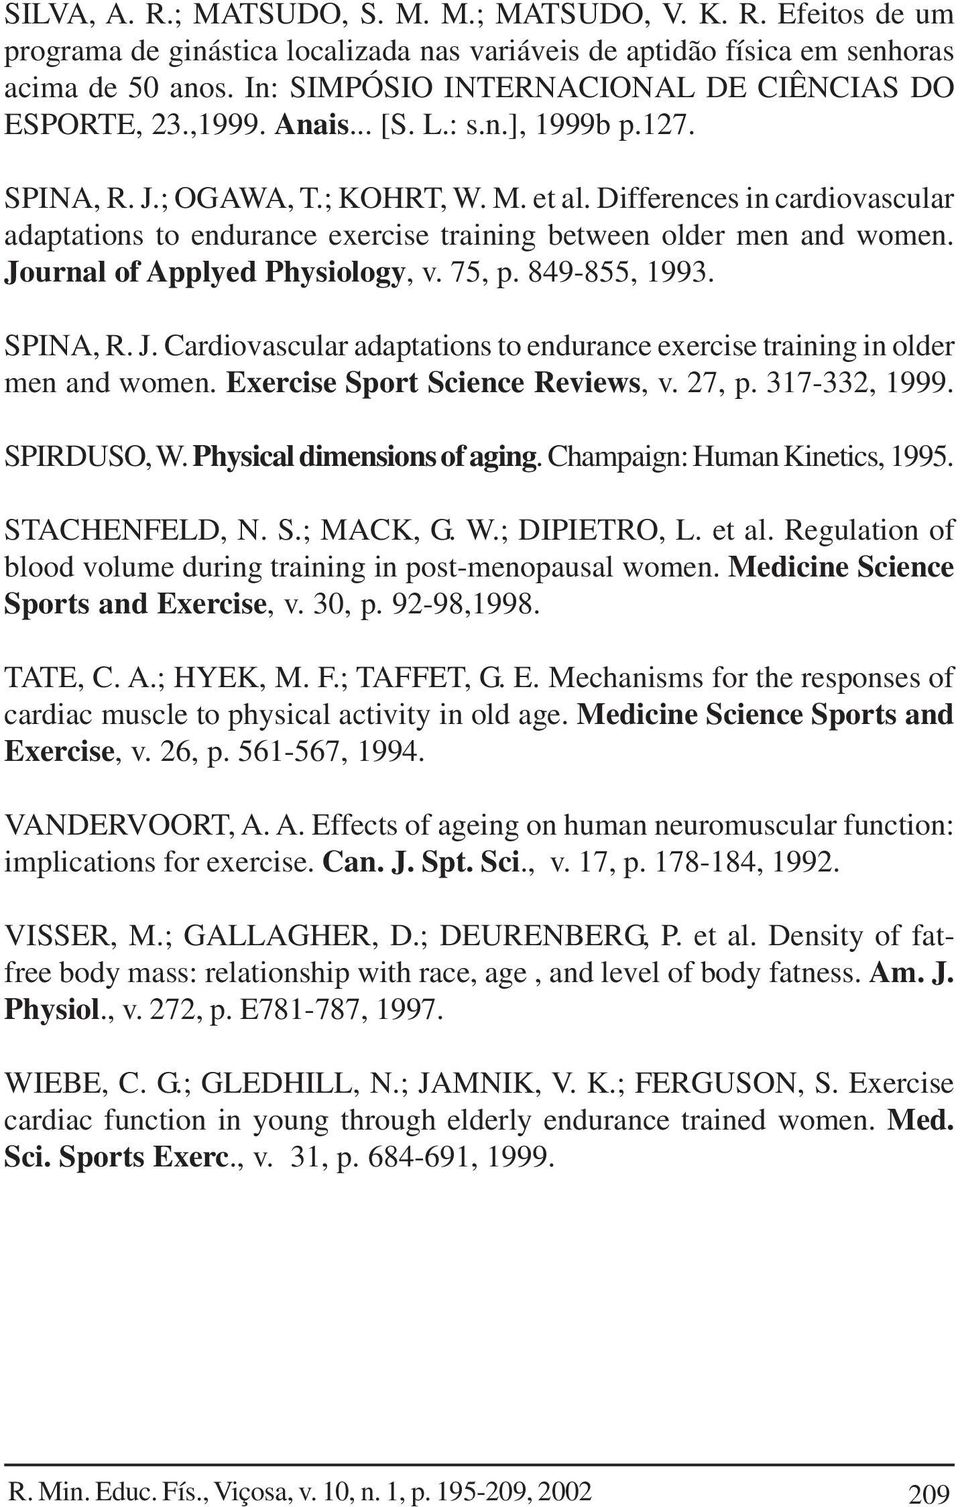 Differences in cardiovascular adaptations to endurance exercise training between older men and women. Journal of Applyed Physiology, v. 75, p. 849-855, 1993. SPINA, R. J. Cardiovascular adaptations to endurance exercise training in older men and women.